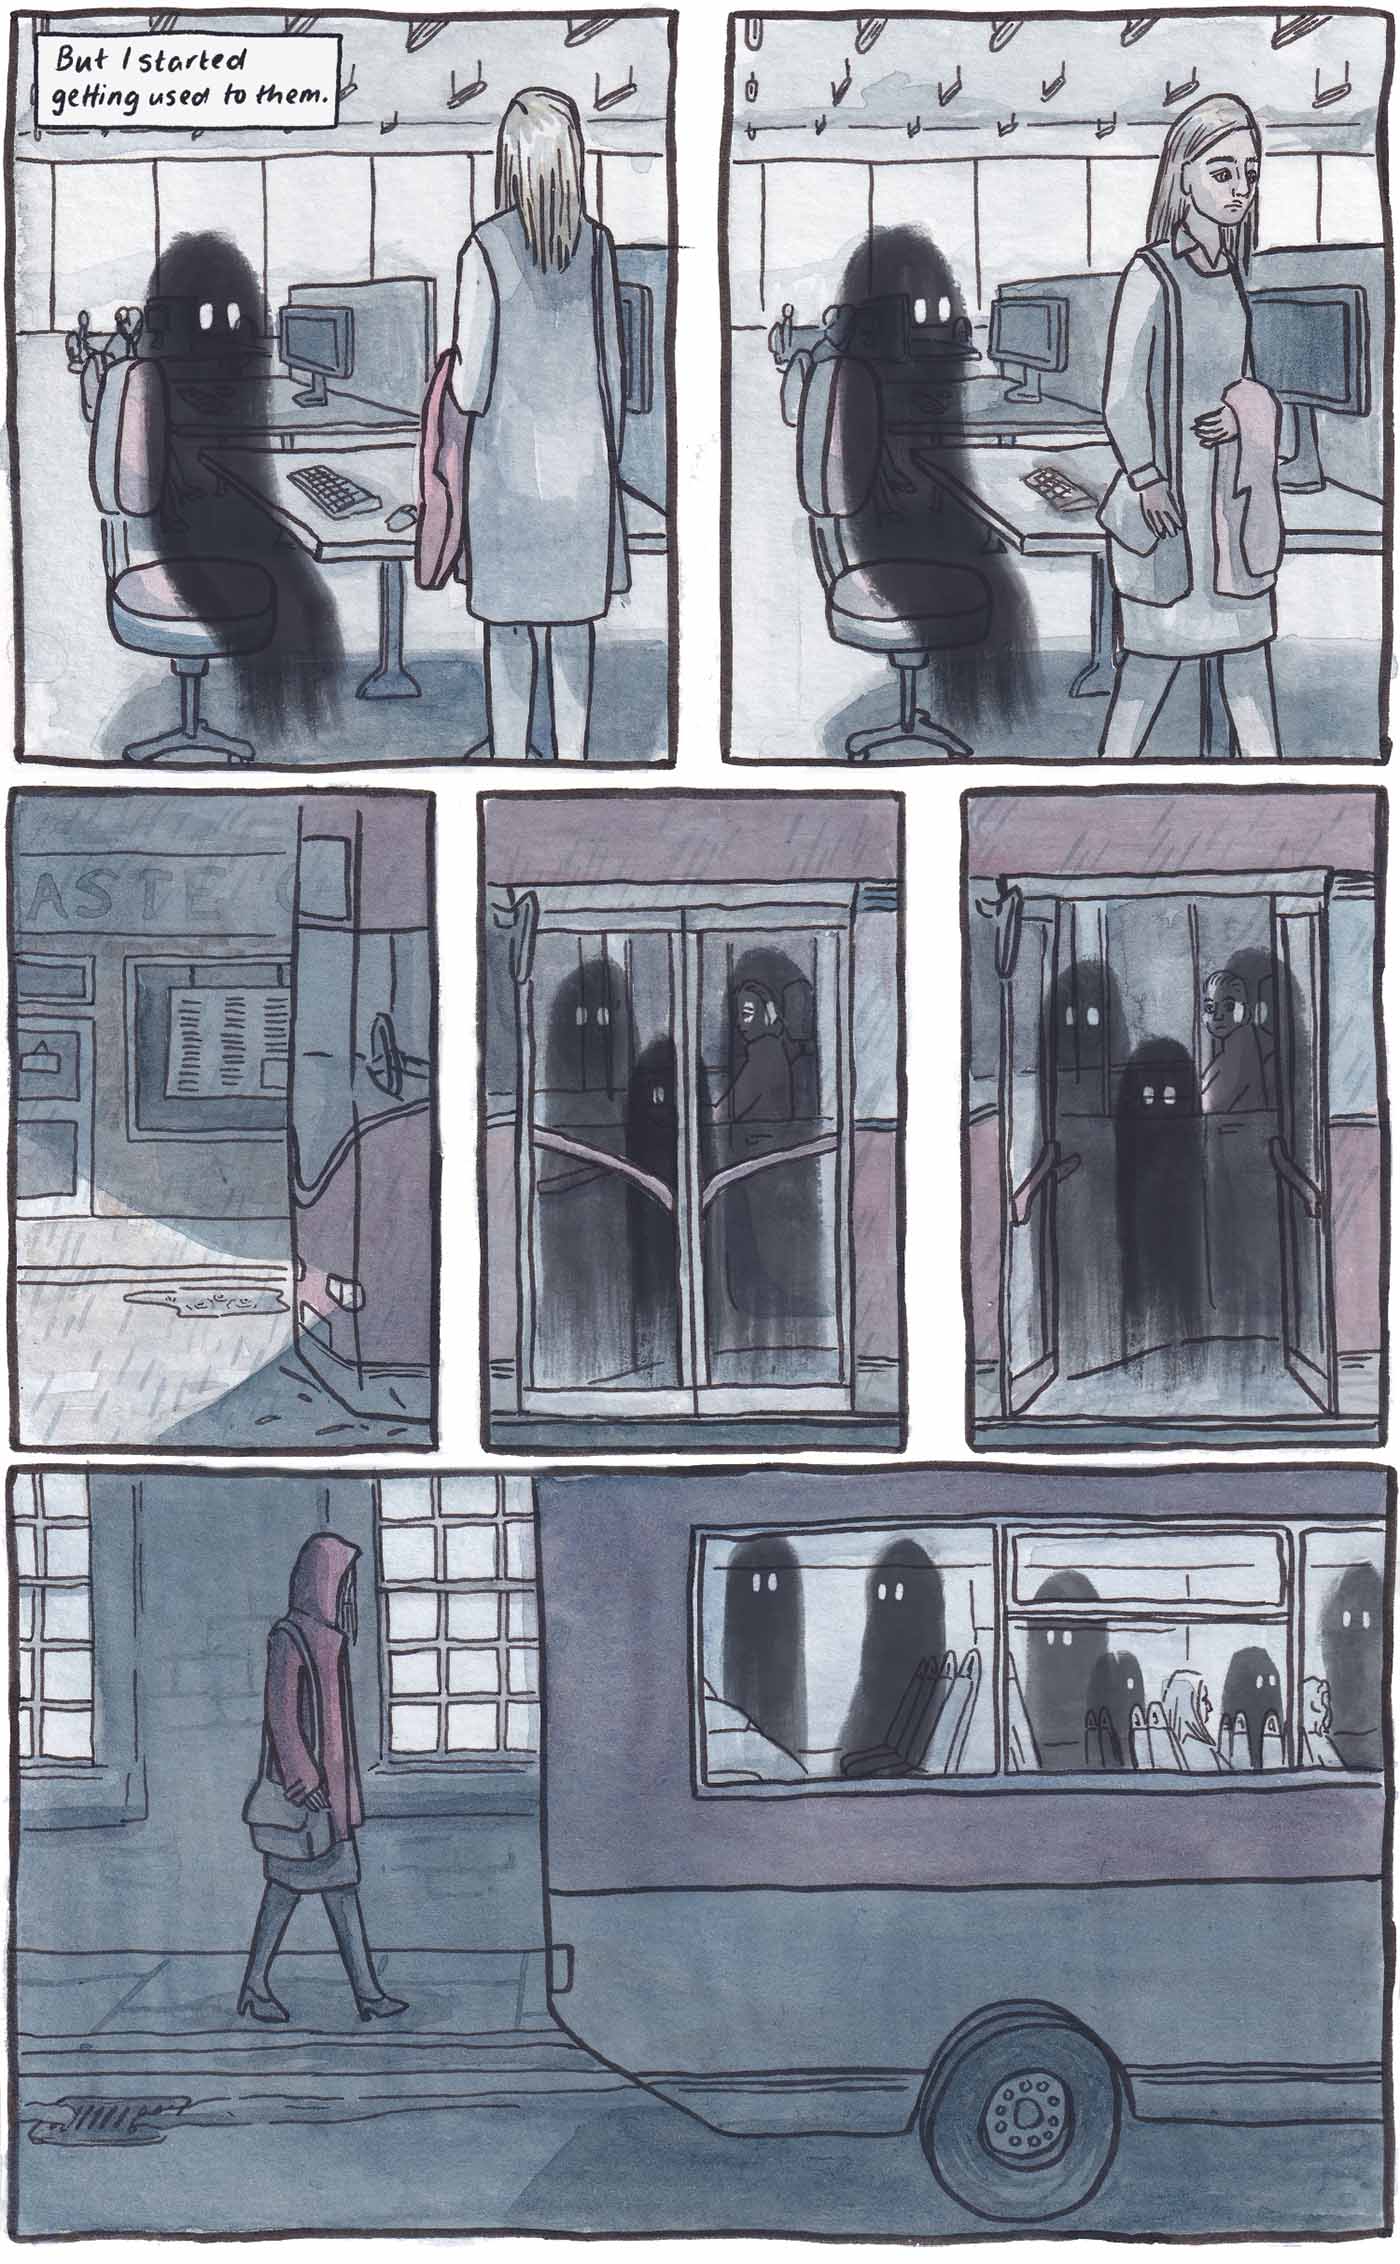 A series of panels from web comic 'Always Used To' showing the main character encountering ghosts in her everyday life including at the office and on the bus.